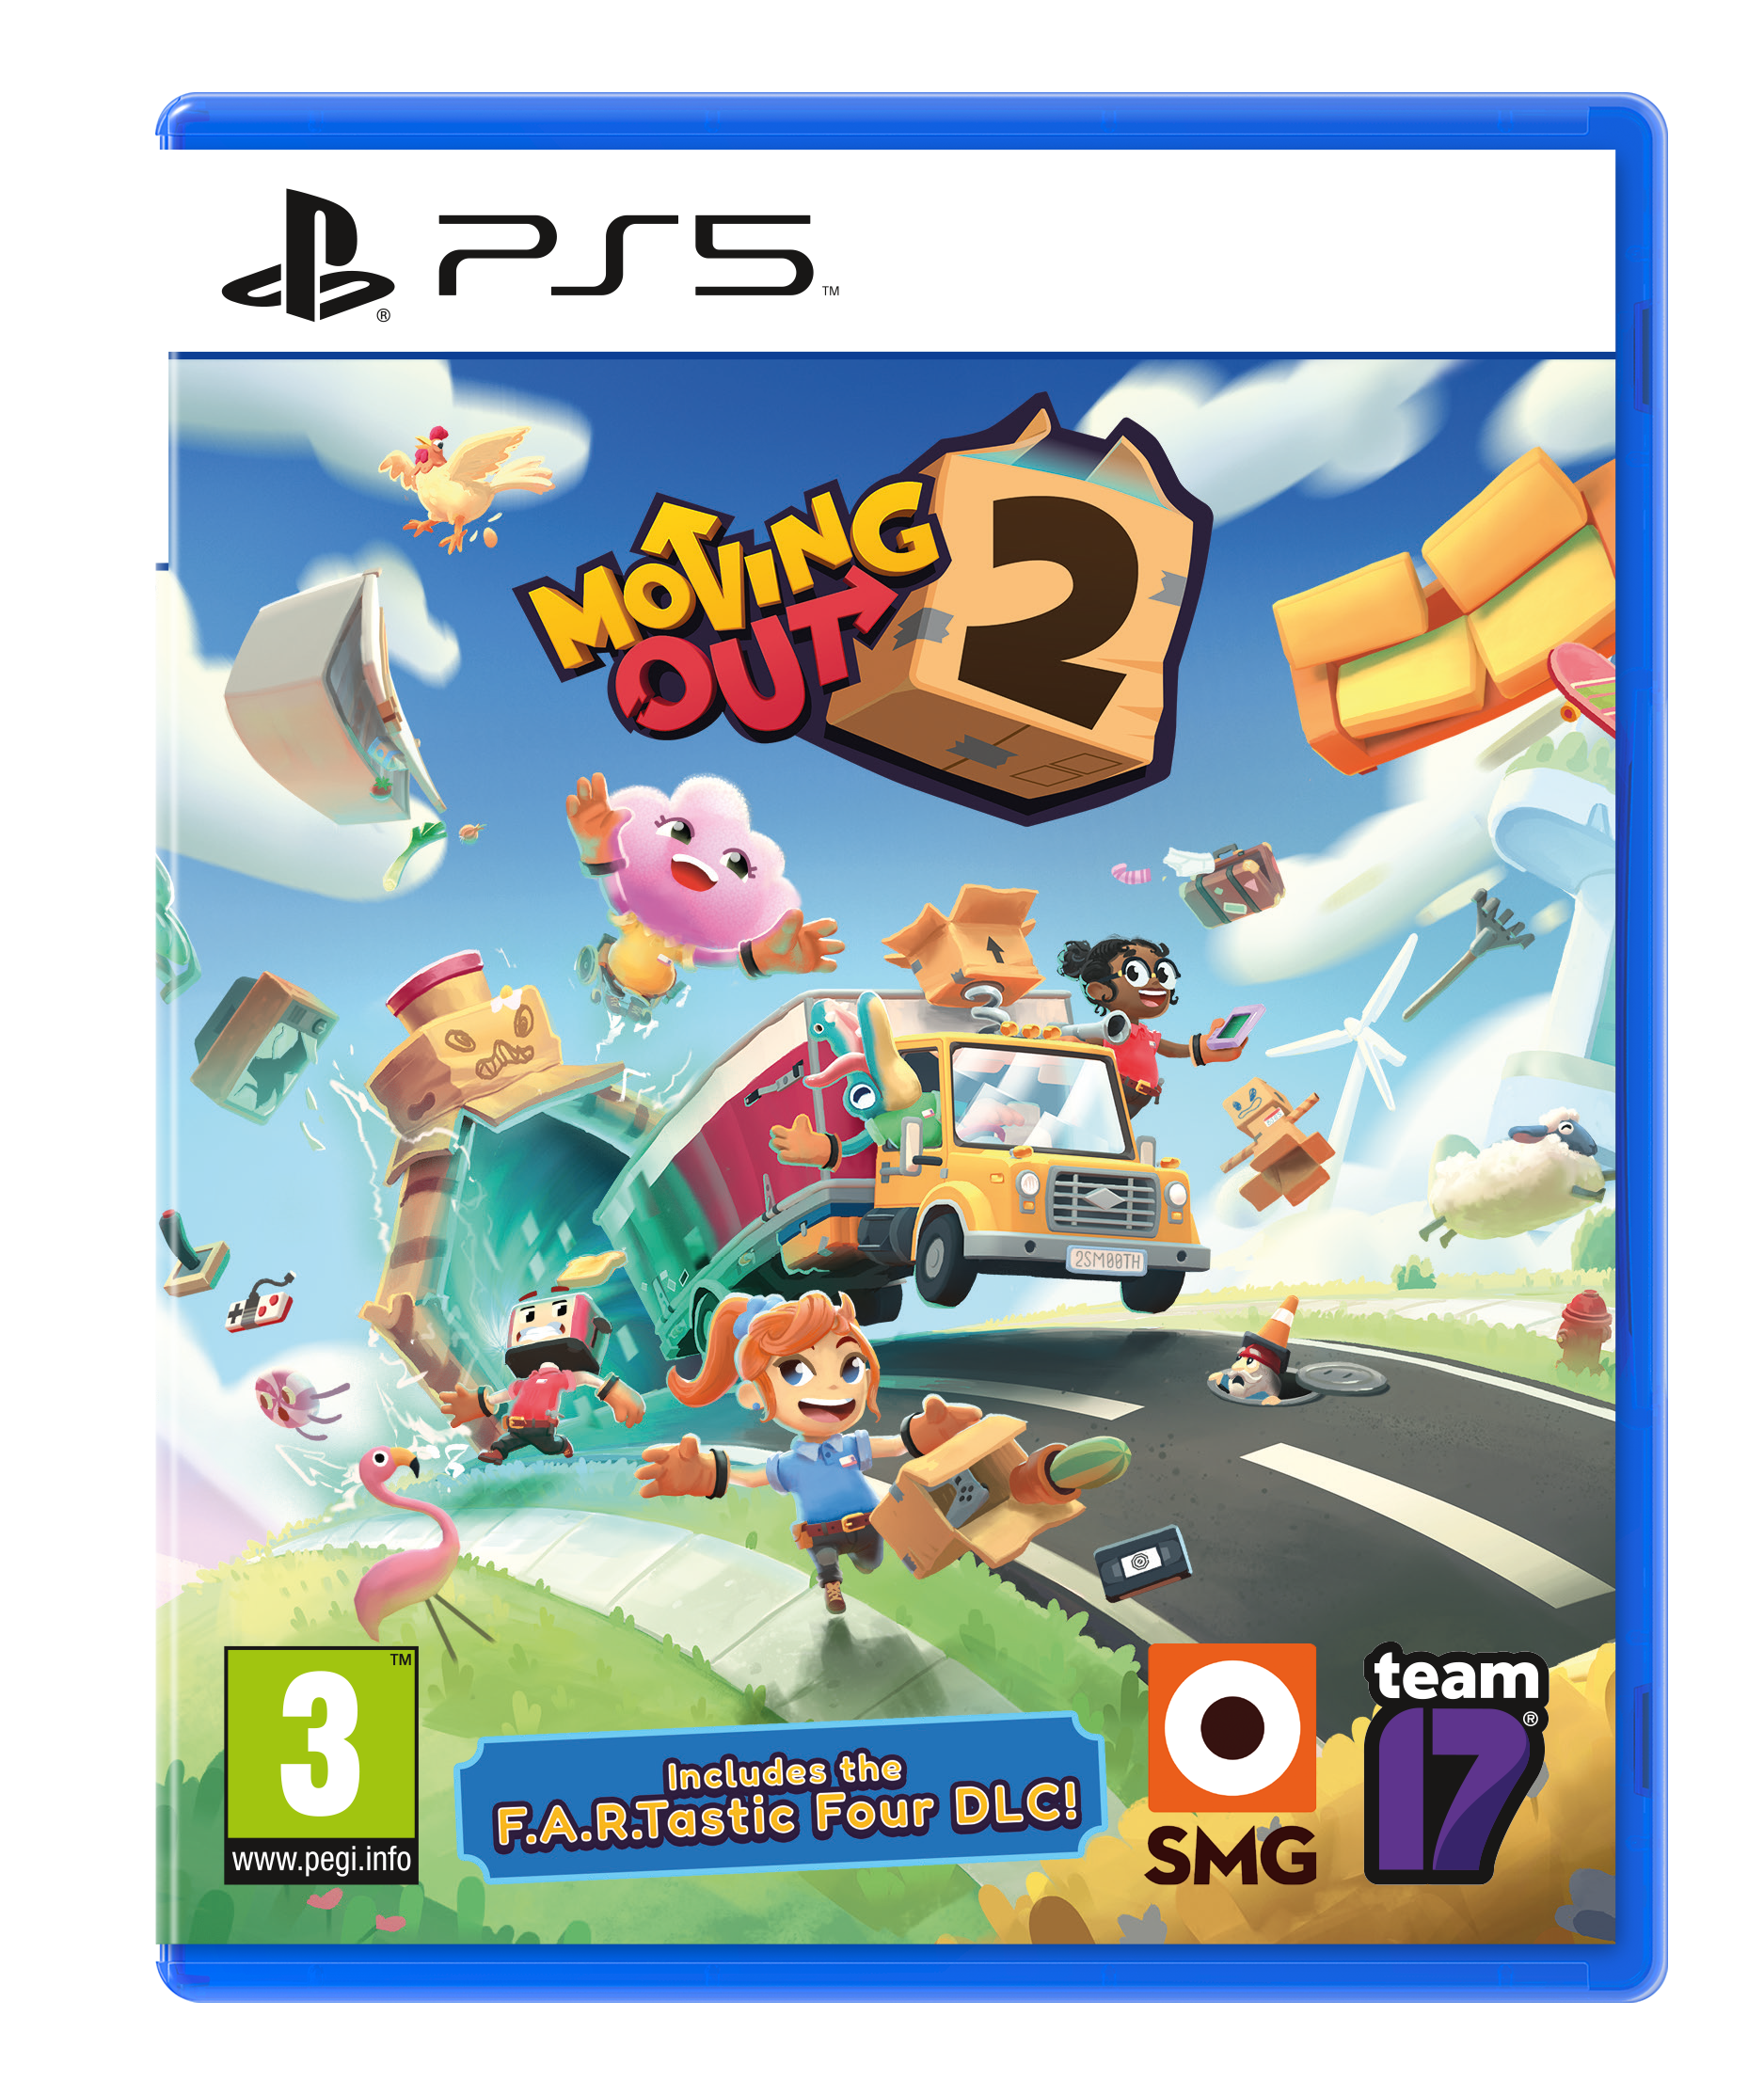 Jogo PS5 Moving Out 2